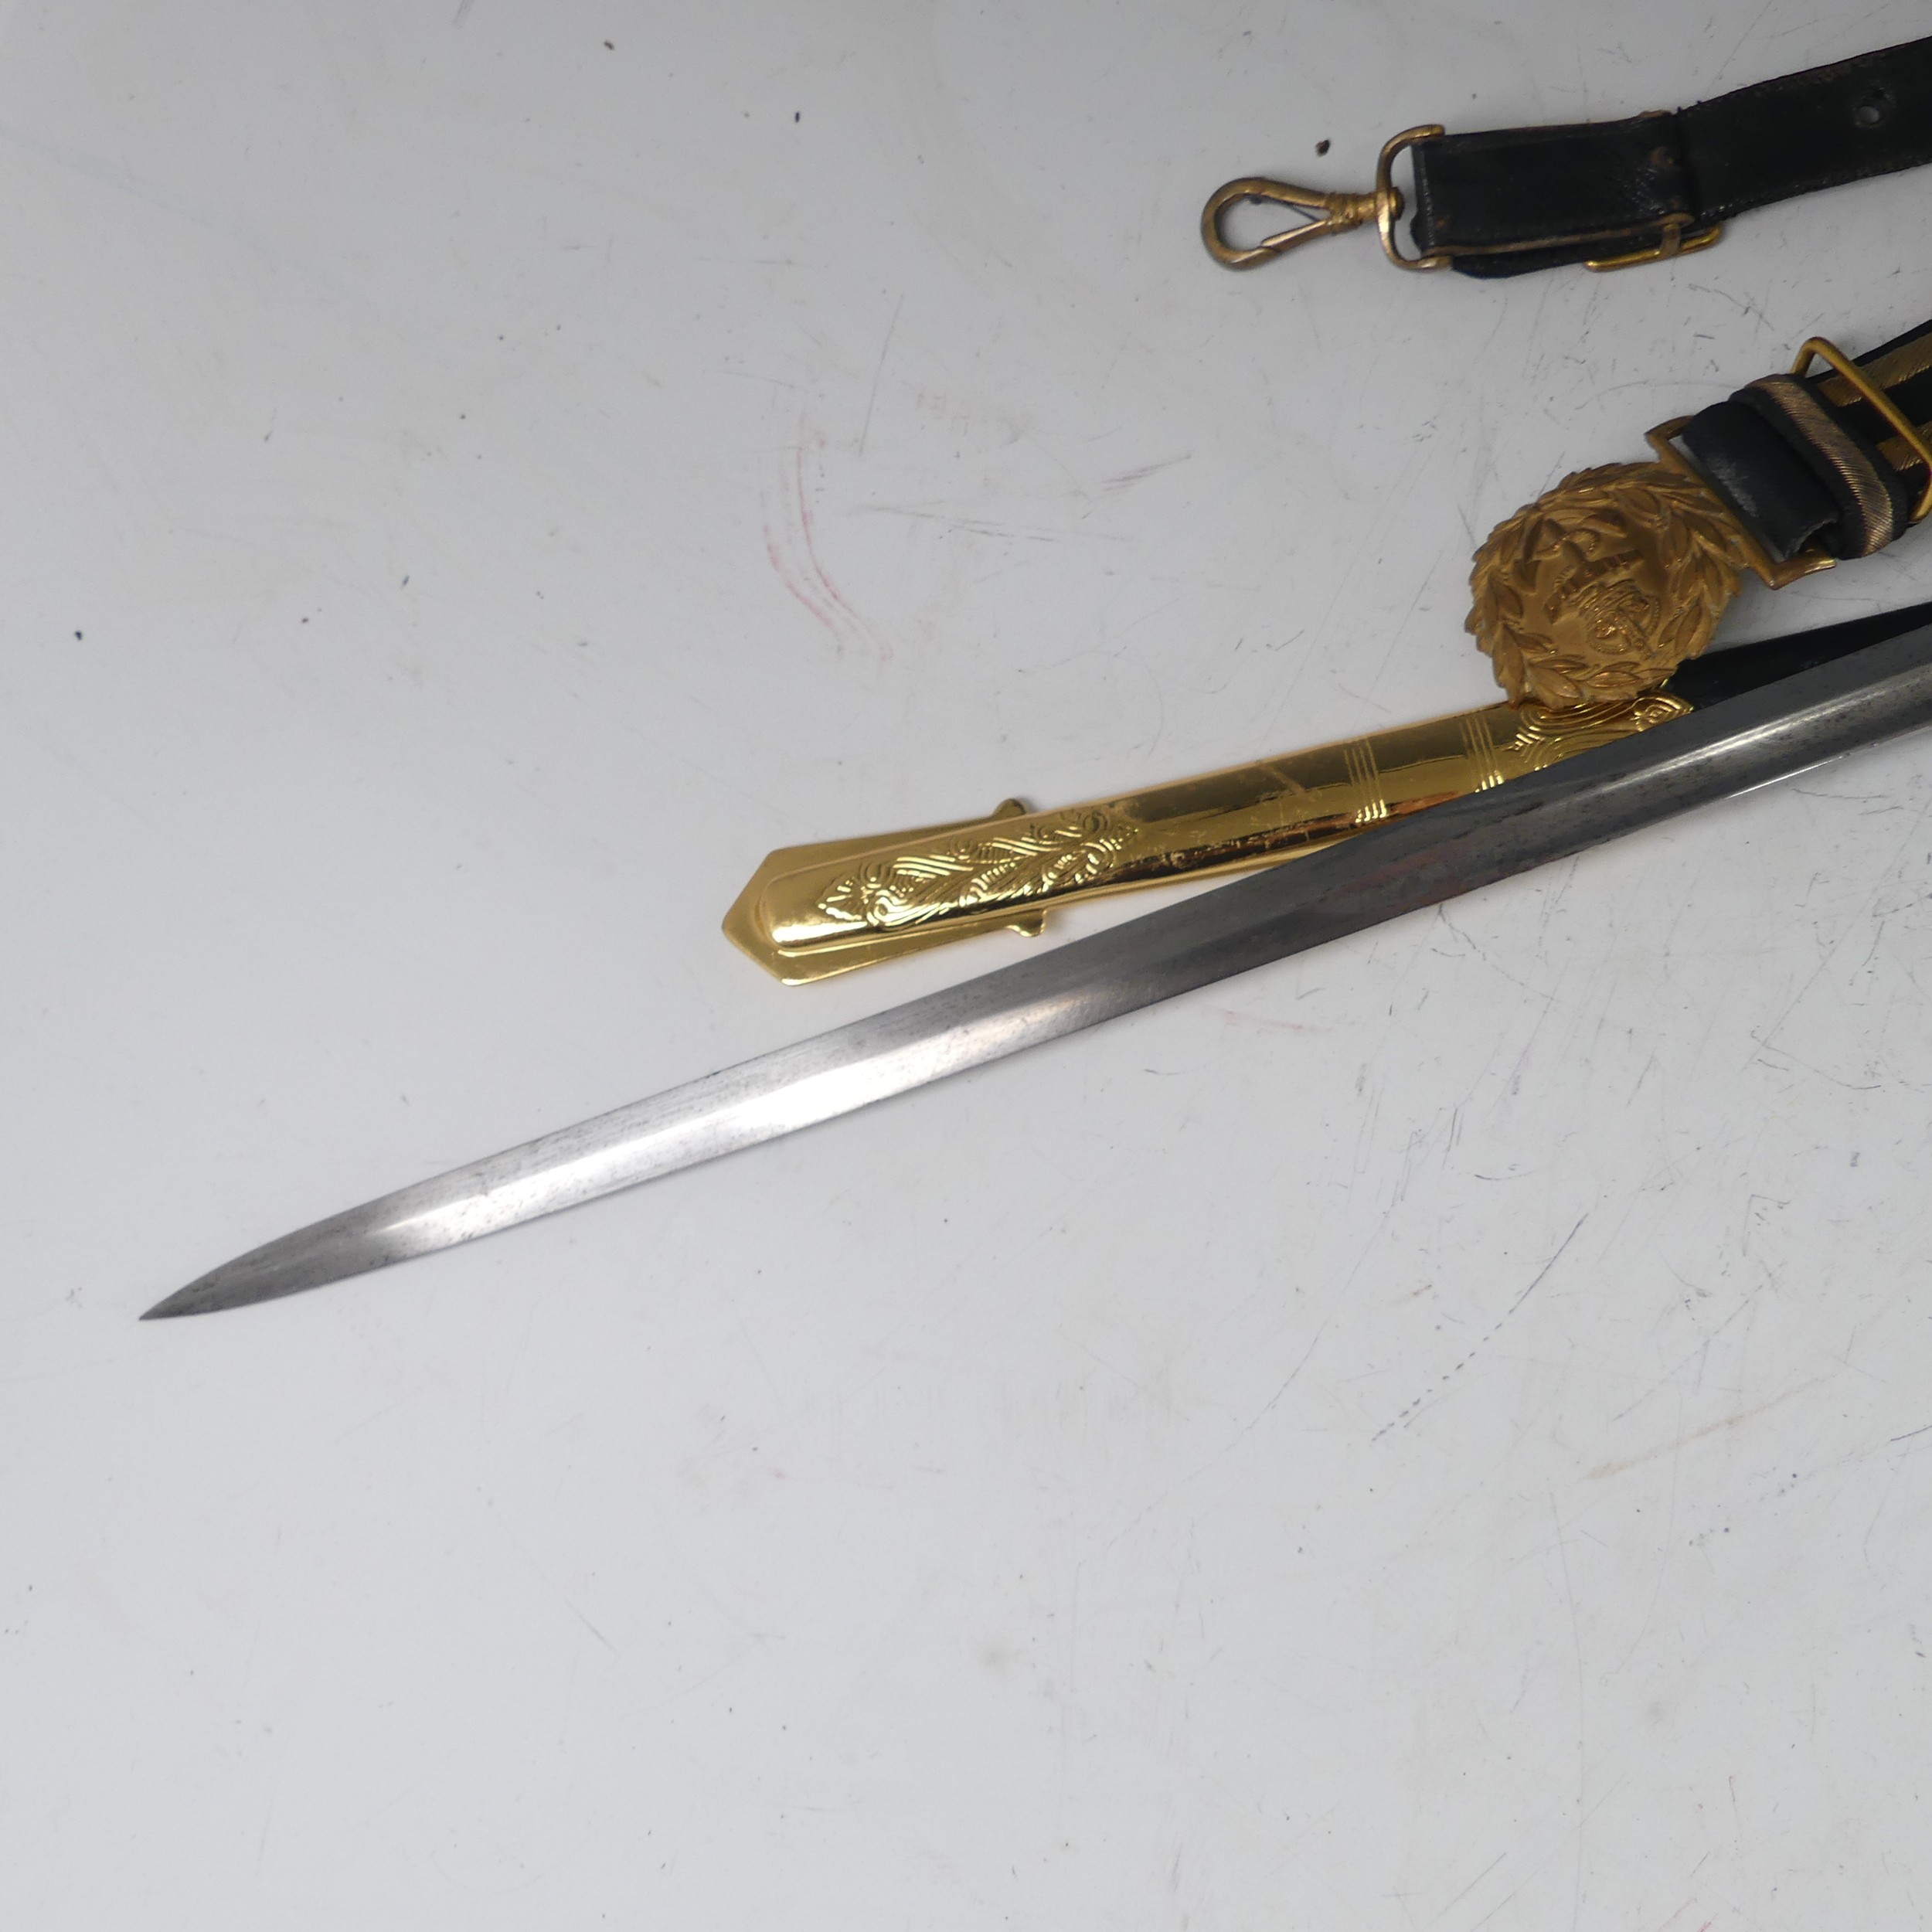 A reproduction 1827 pattern Royal Navy Officers Sword, fullered steel blade etched with insignia, - Image 8 of 10